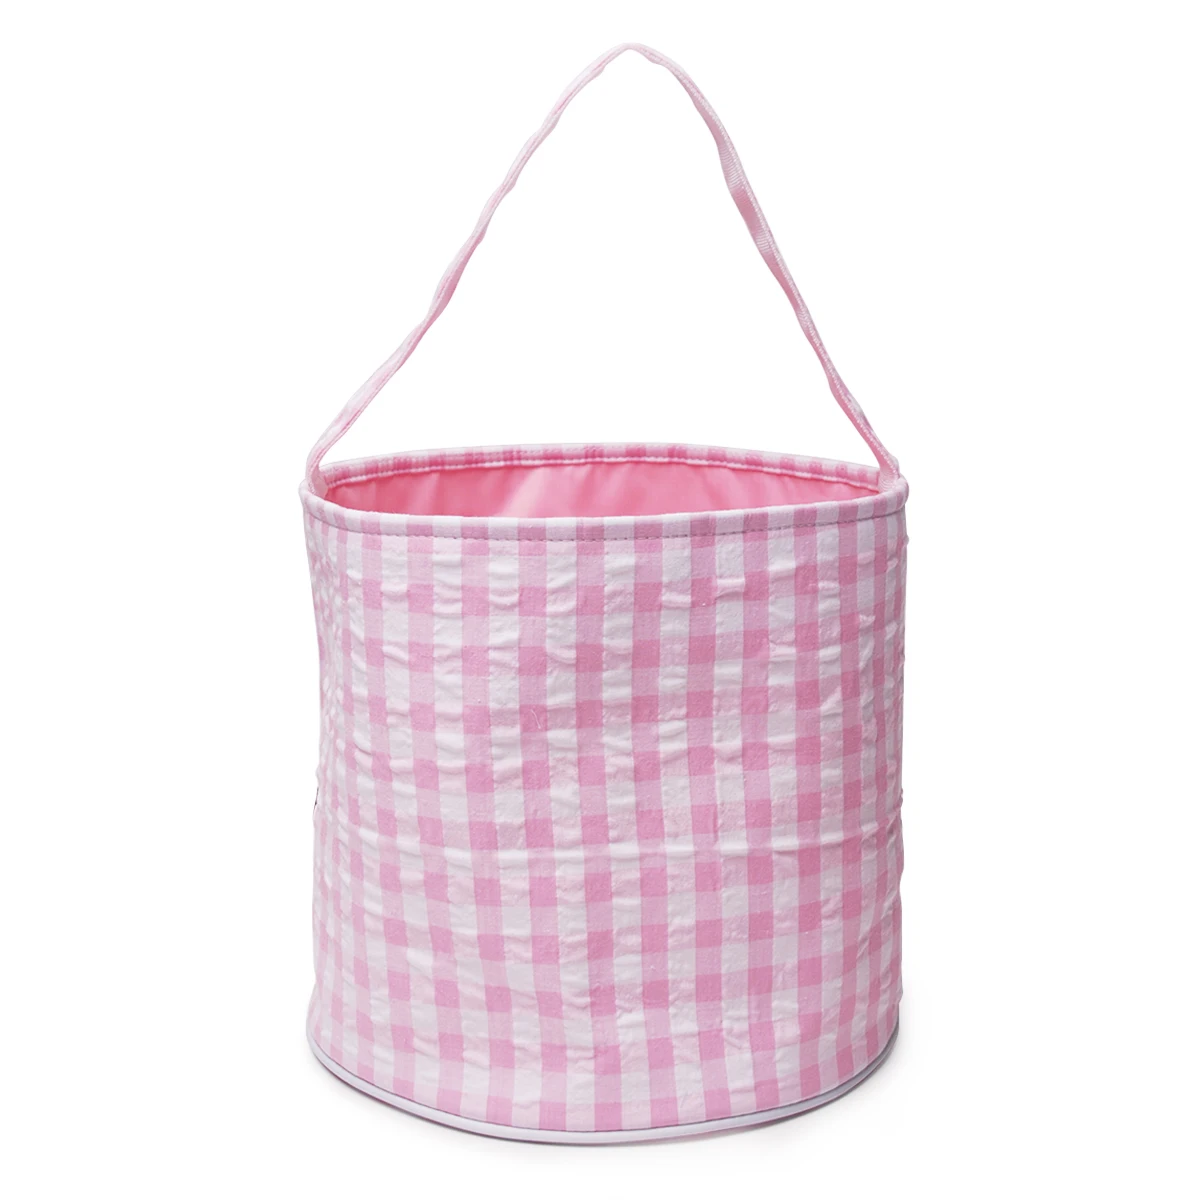 

2021 Amazon Hot Seersucker Easter Plaid Bucket Tote Bag Easter Egg Basket for kids, As pictures